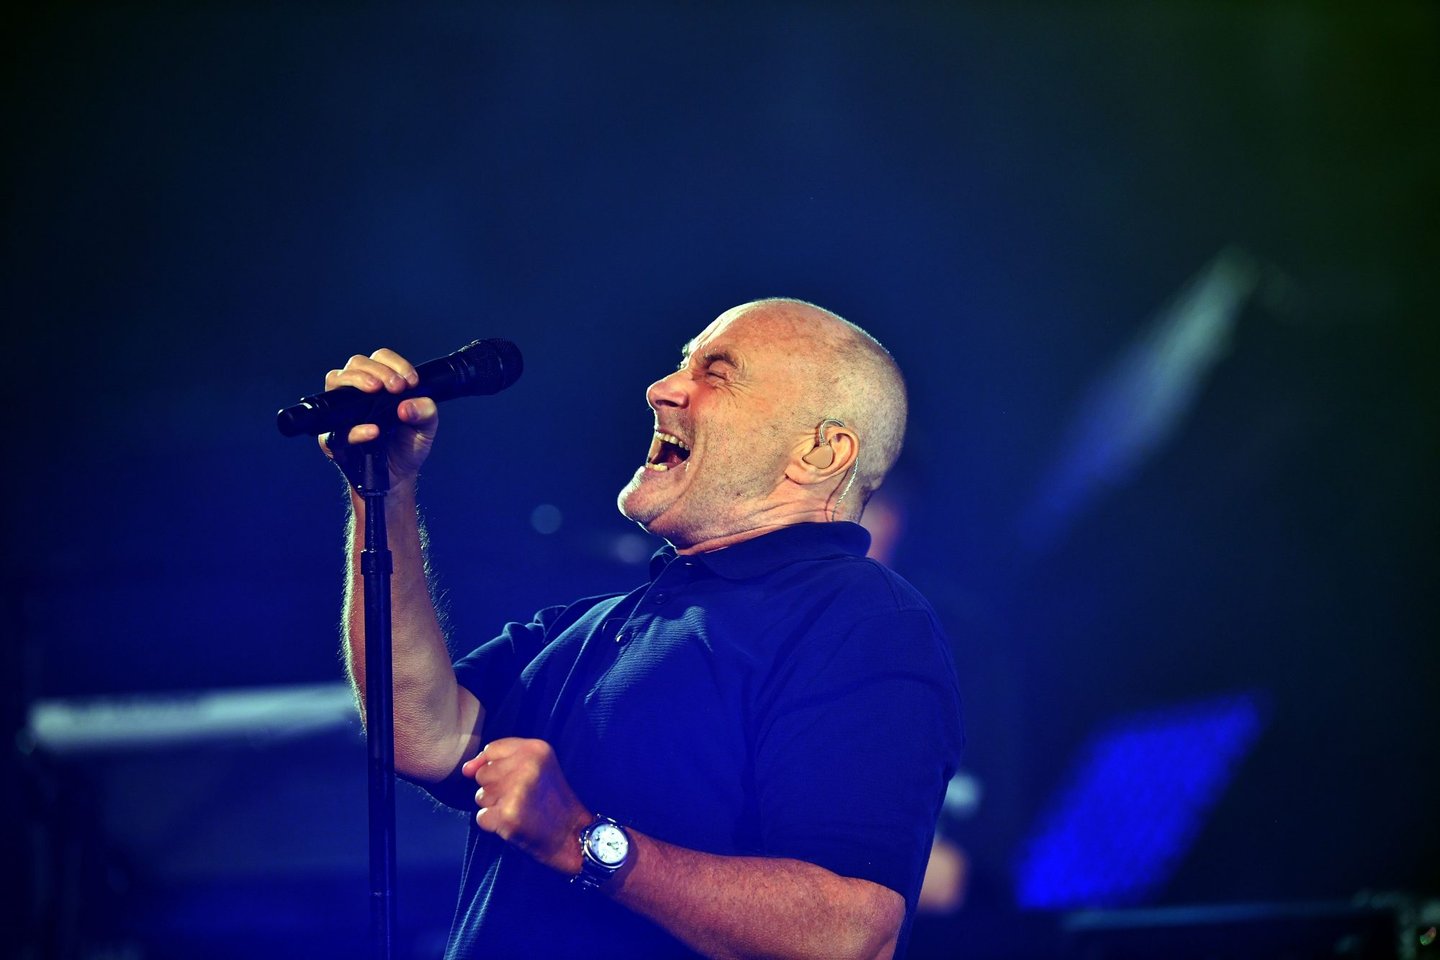 British singer Phil Collins performs during the opening ceremony of the 2016 US Open tennis tournament at the USTA Billie Jean King National Tennis Center in New York on August 29, 2016. / AFP / Jewel SAMAD (Photo credit should read JEWEL SAMAD/AFP/Getty Images)